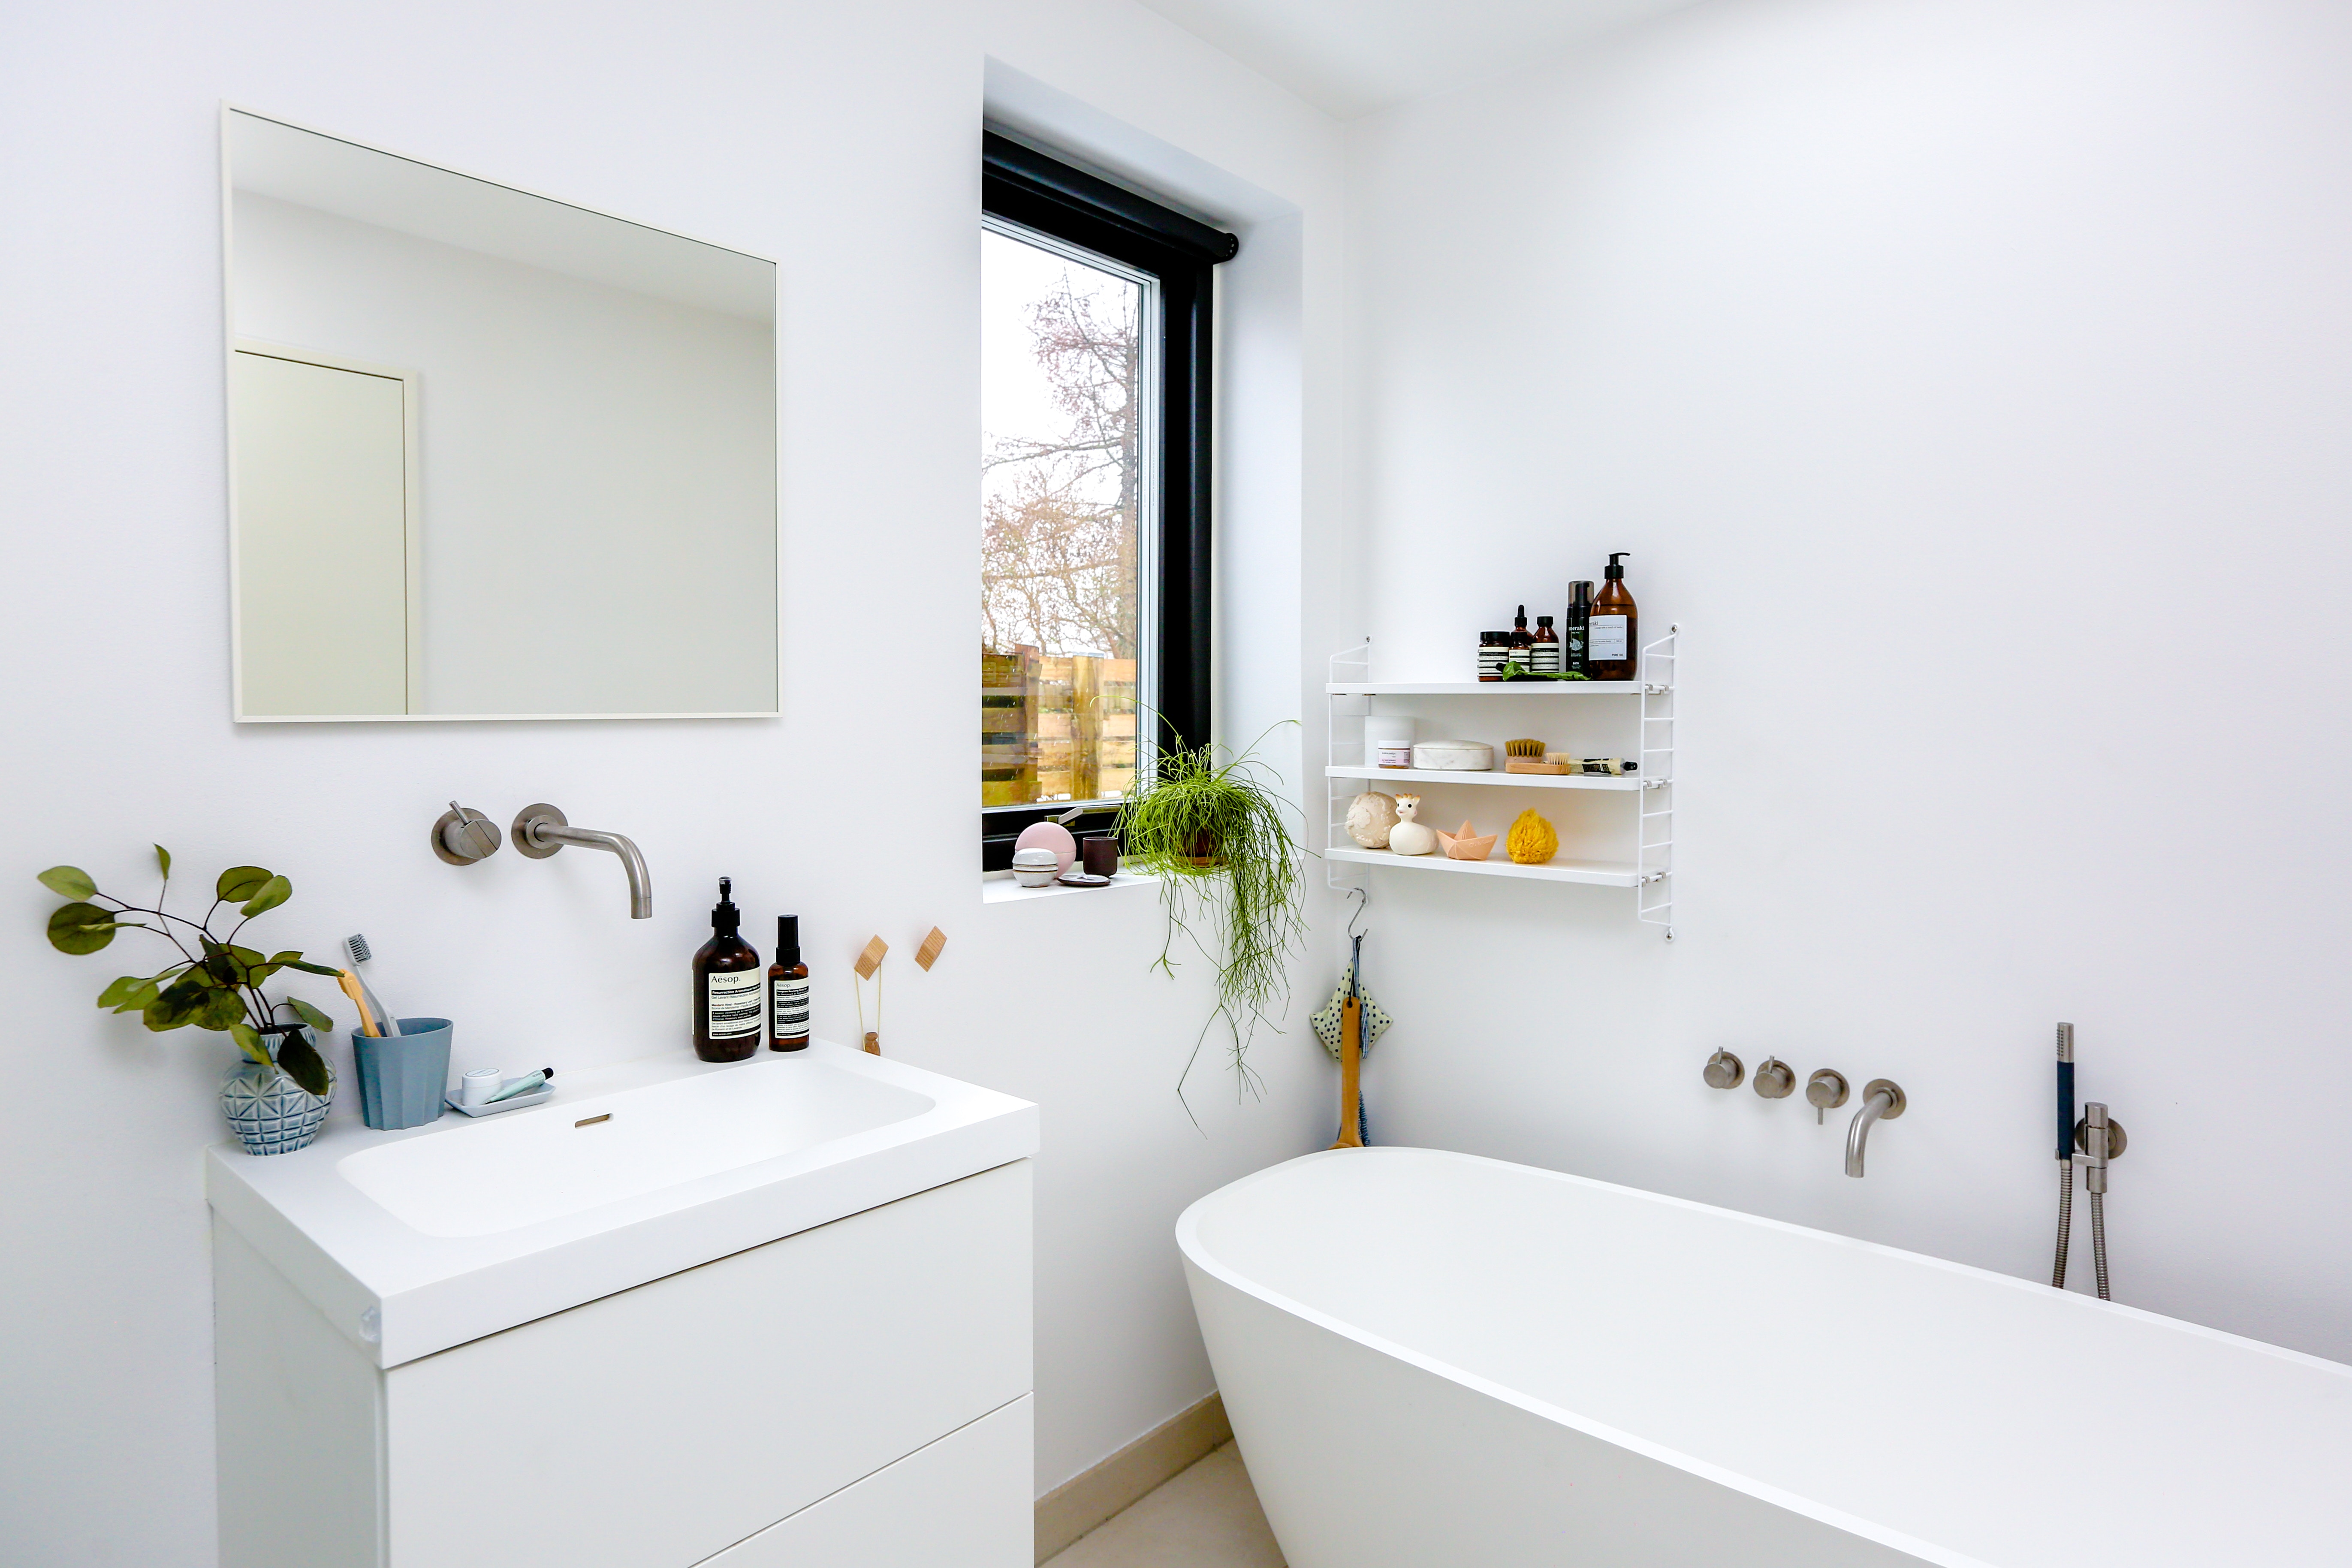 Adjustments you can make to your bathroom to make it more mobility friendly